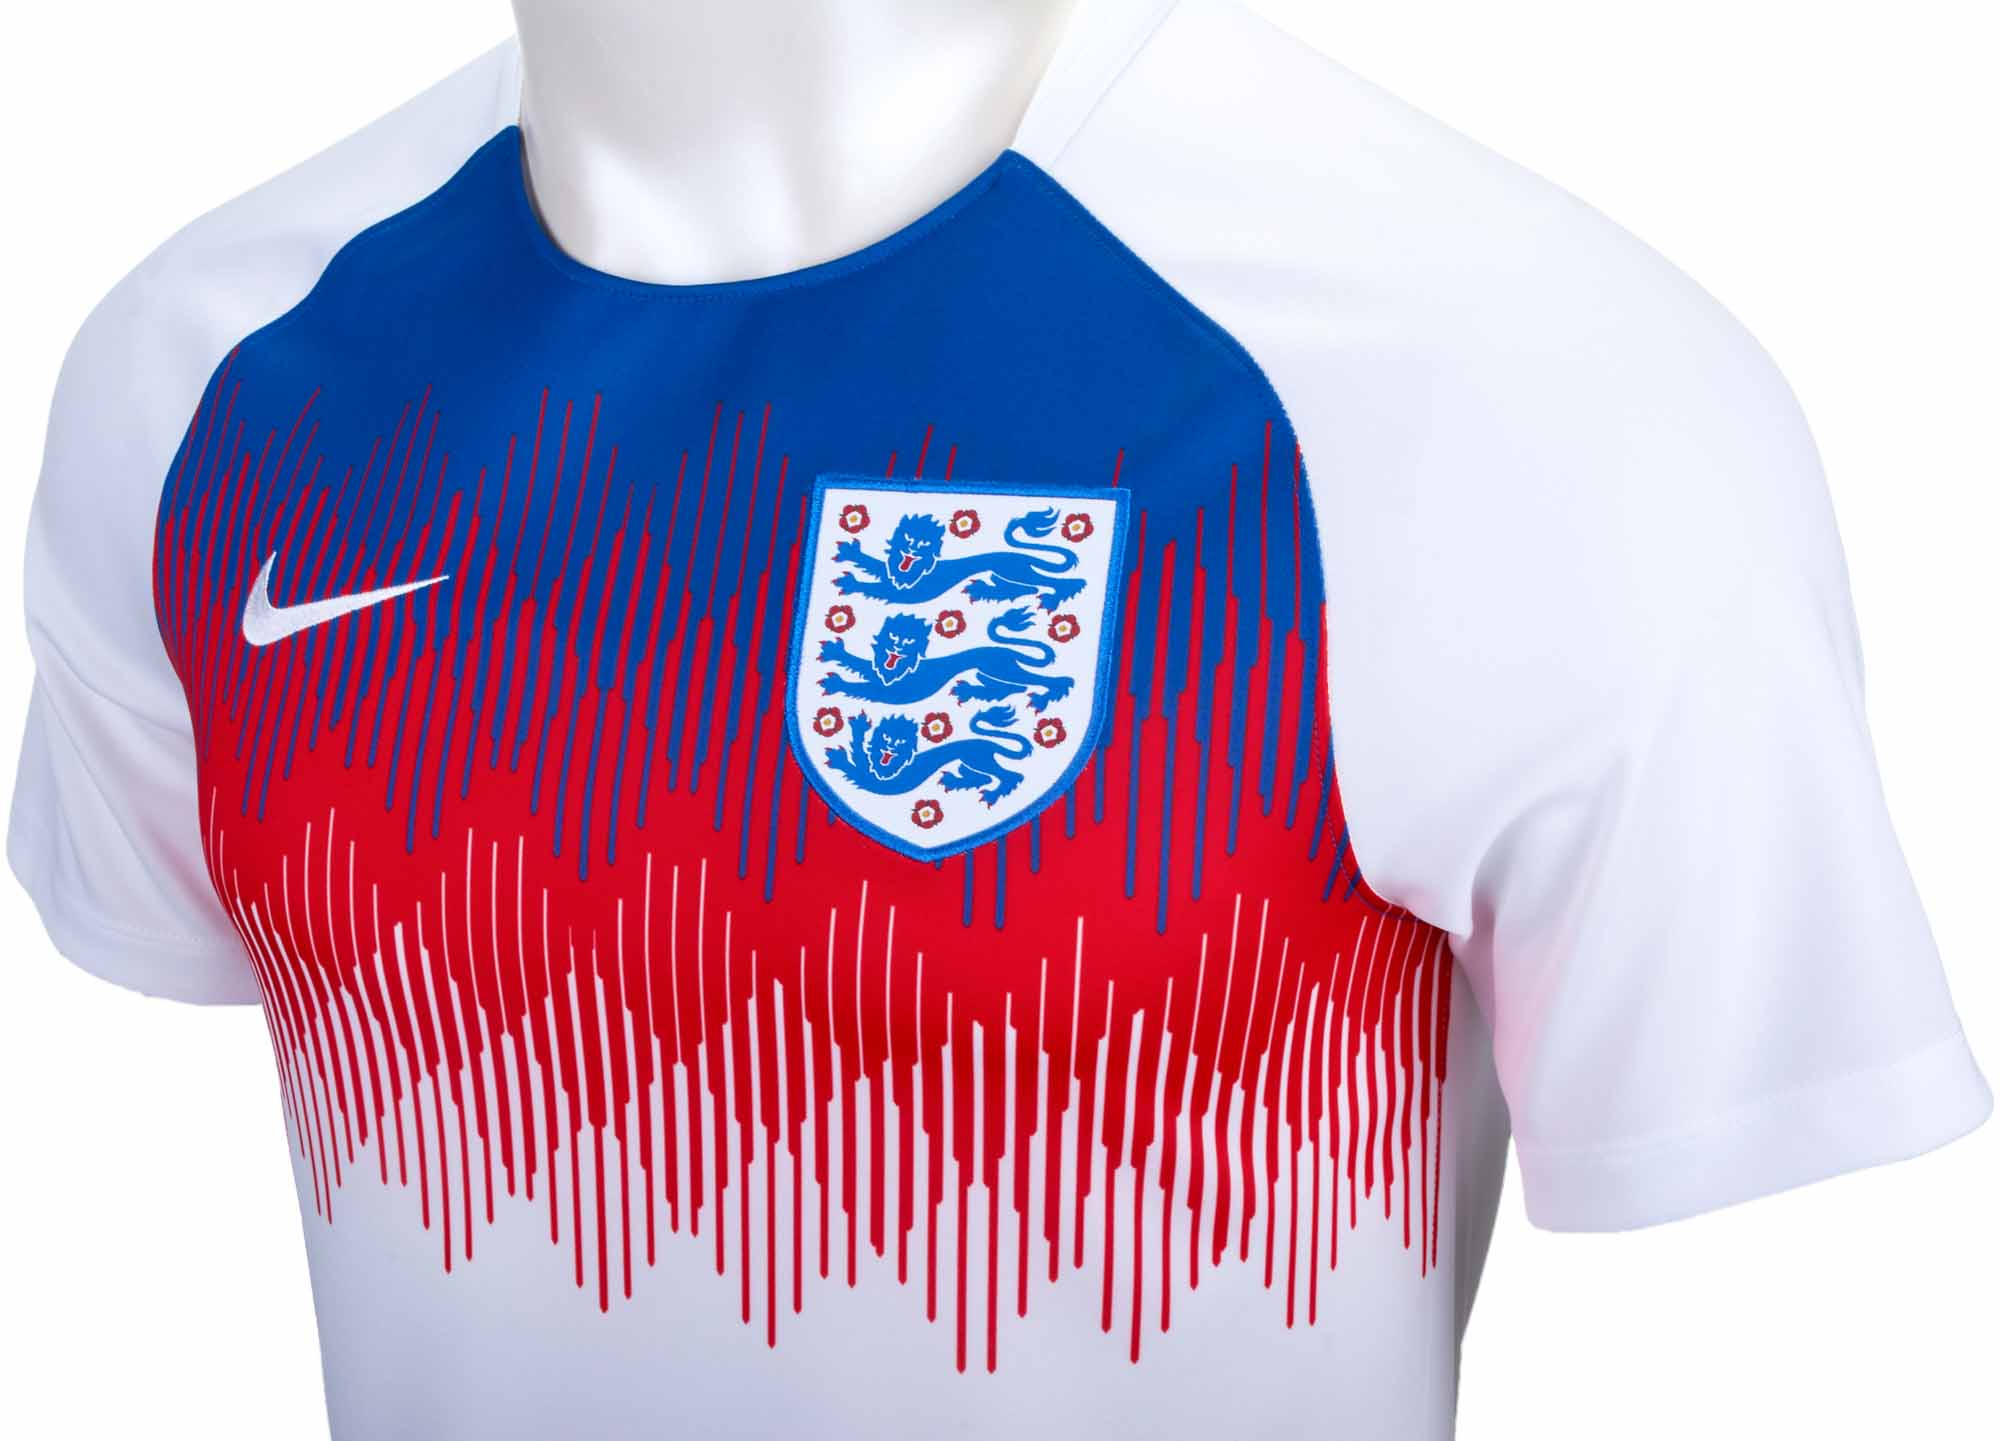 england youth soccer jersey